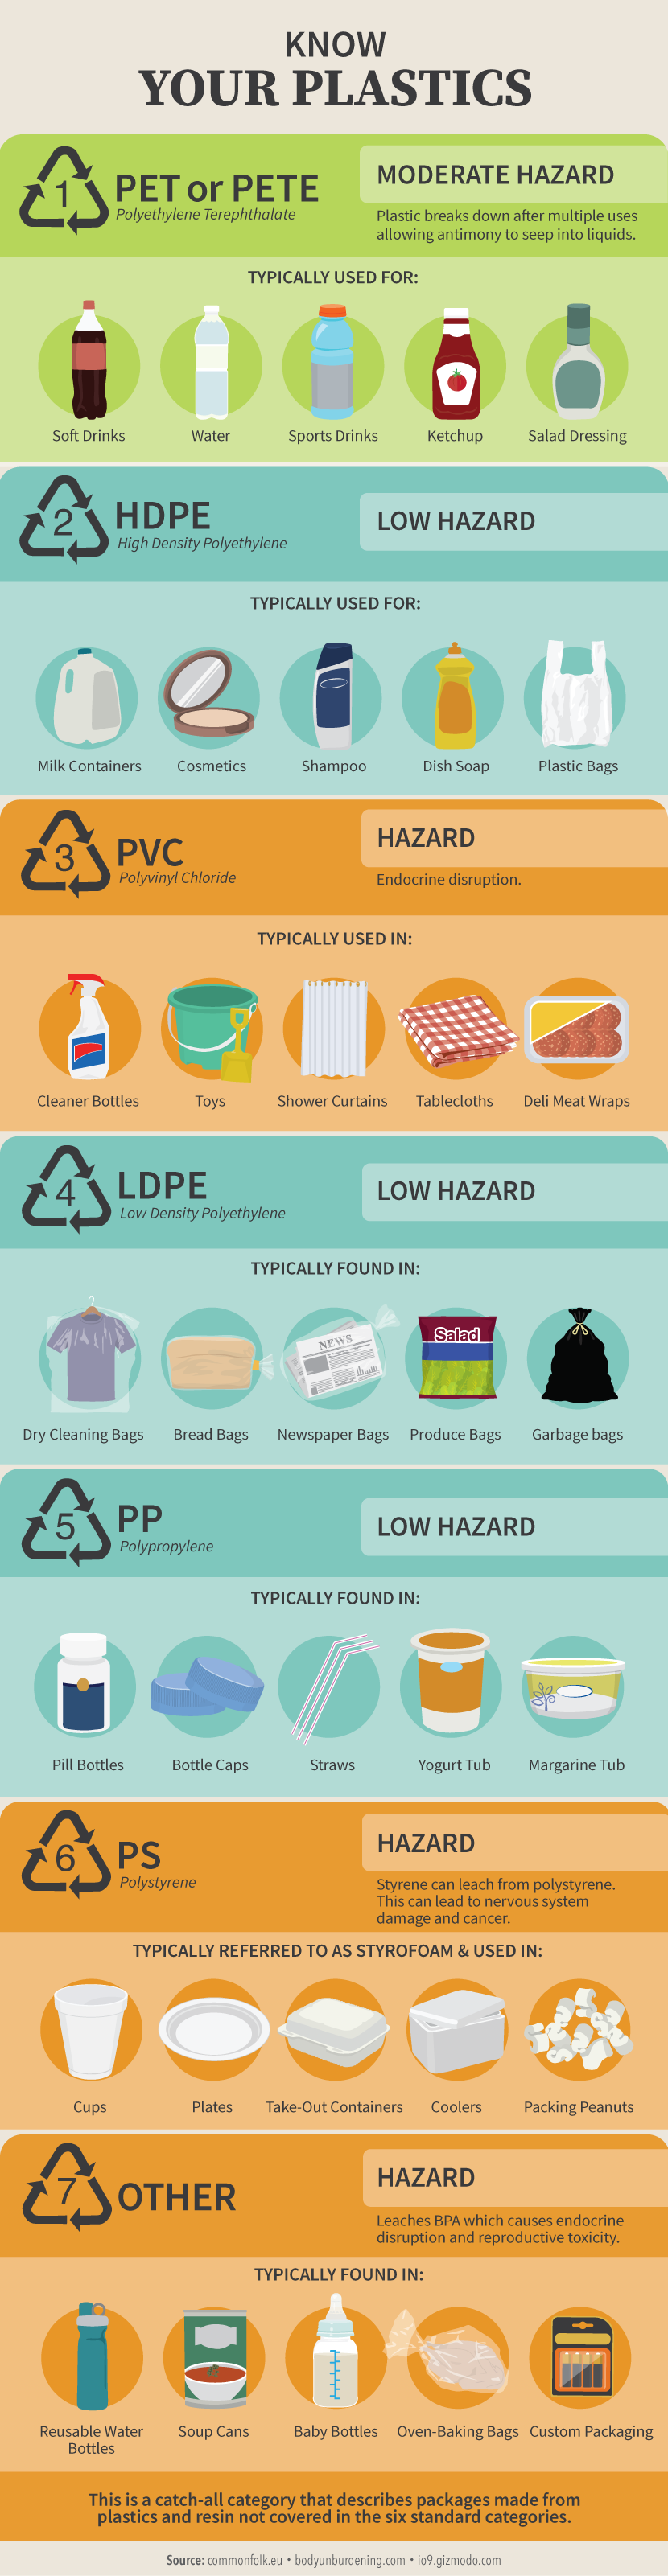 Guide to Eliminating Plastic: Different Types of Plastics